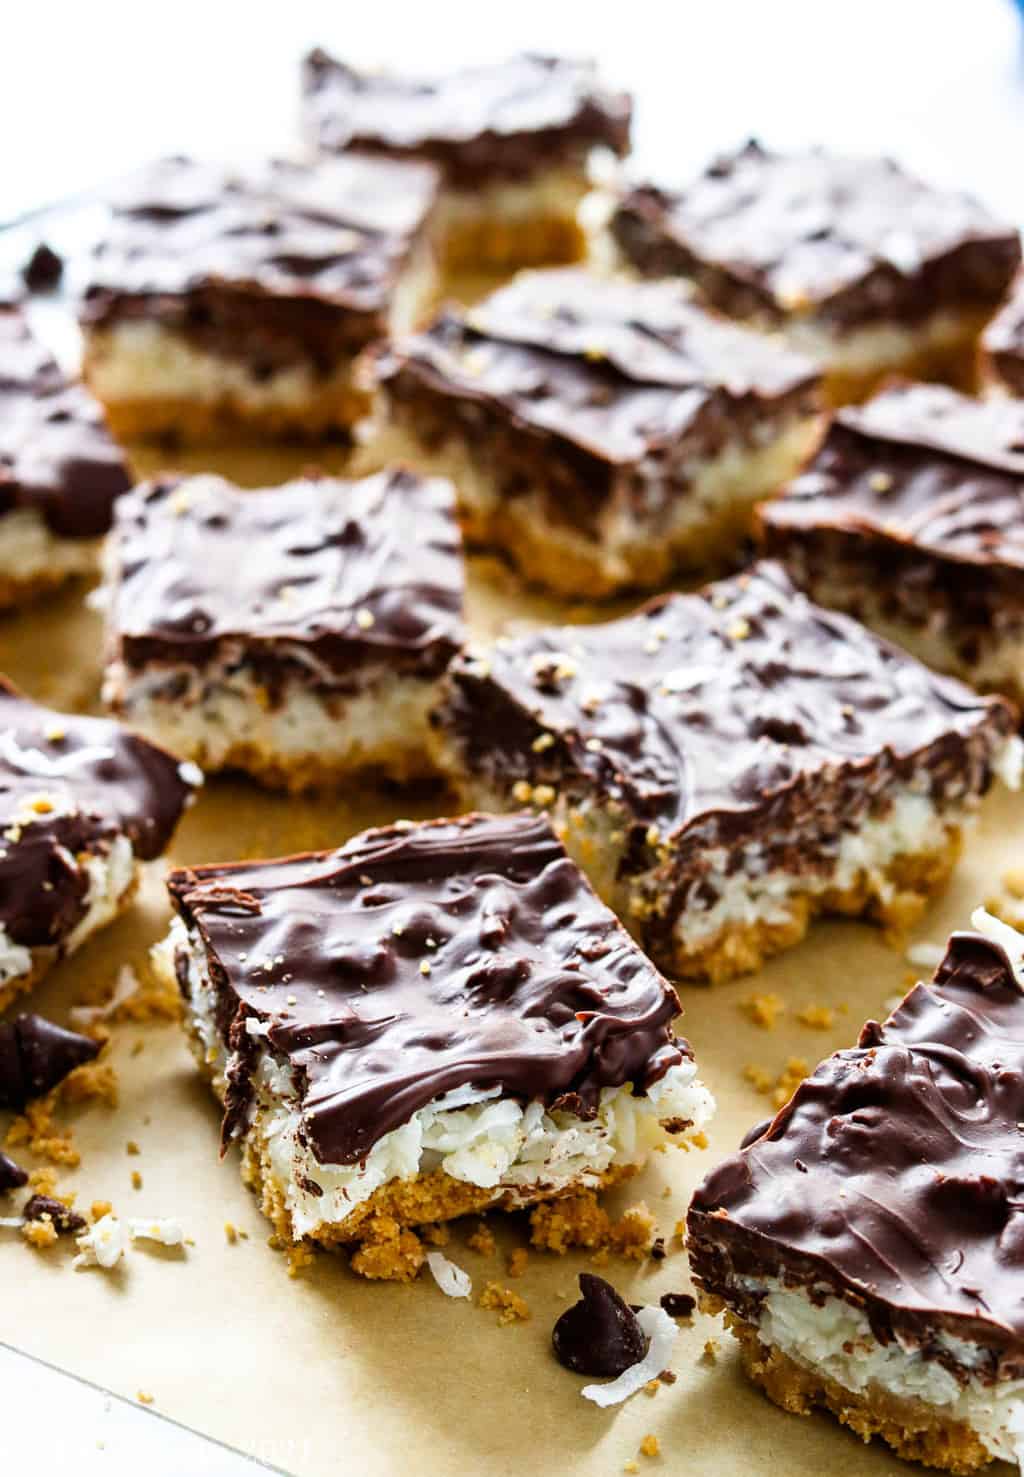 Chocolate coconut bars on a parchment paper with light in the background